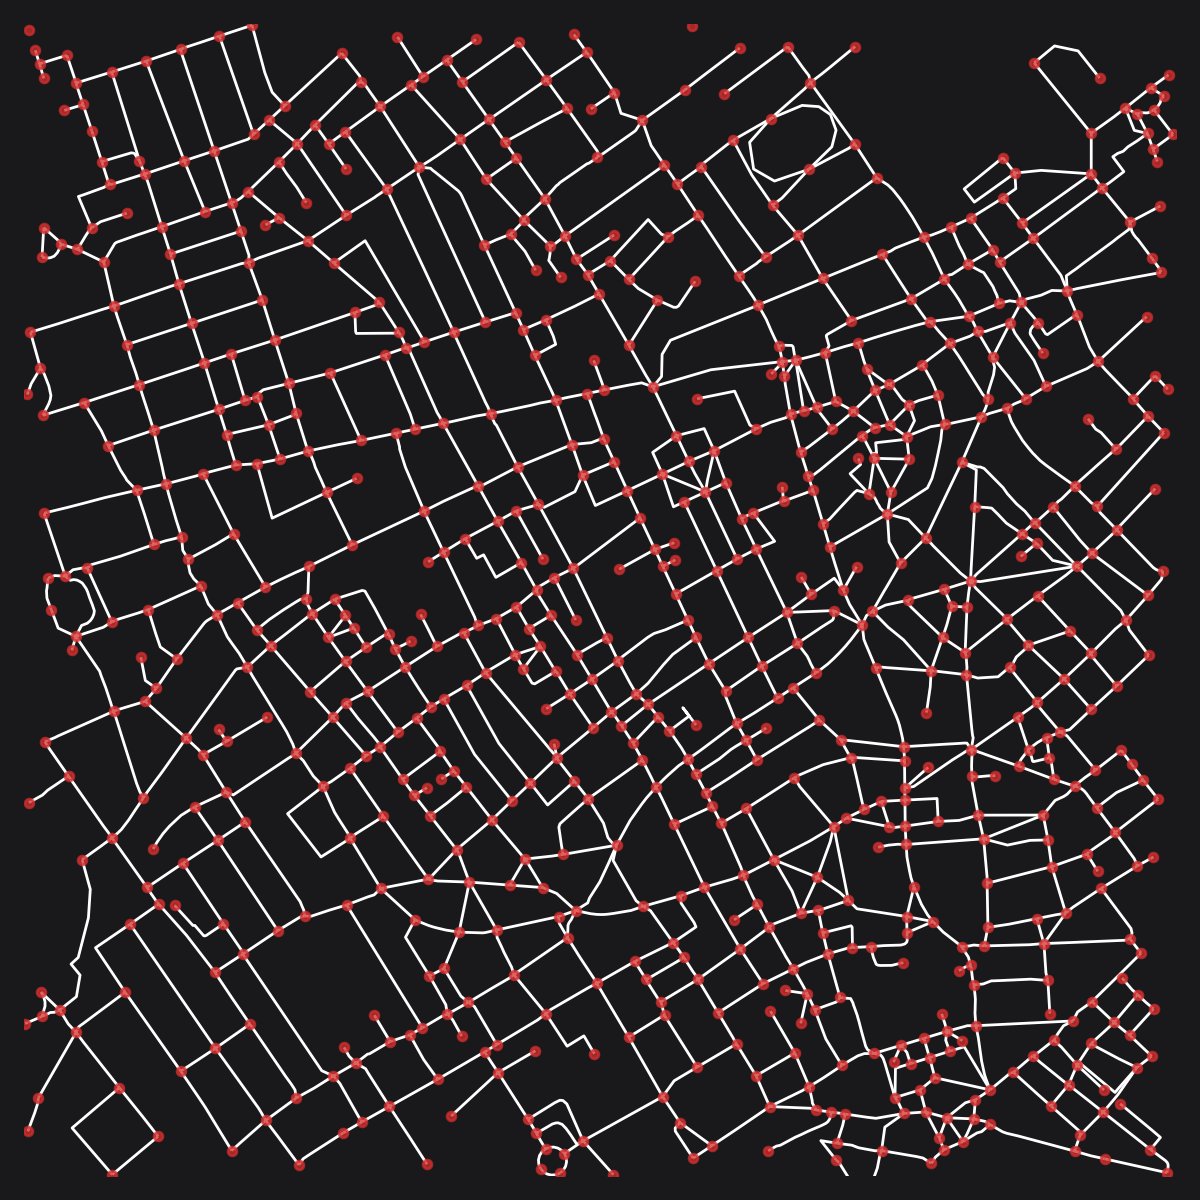 The automatically cleaned graph from OSM